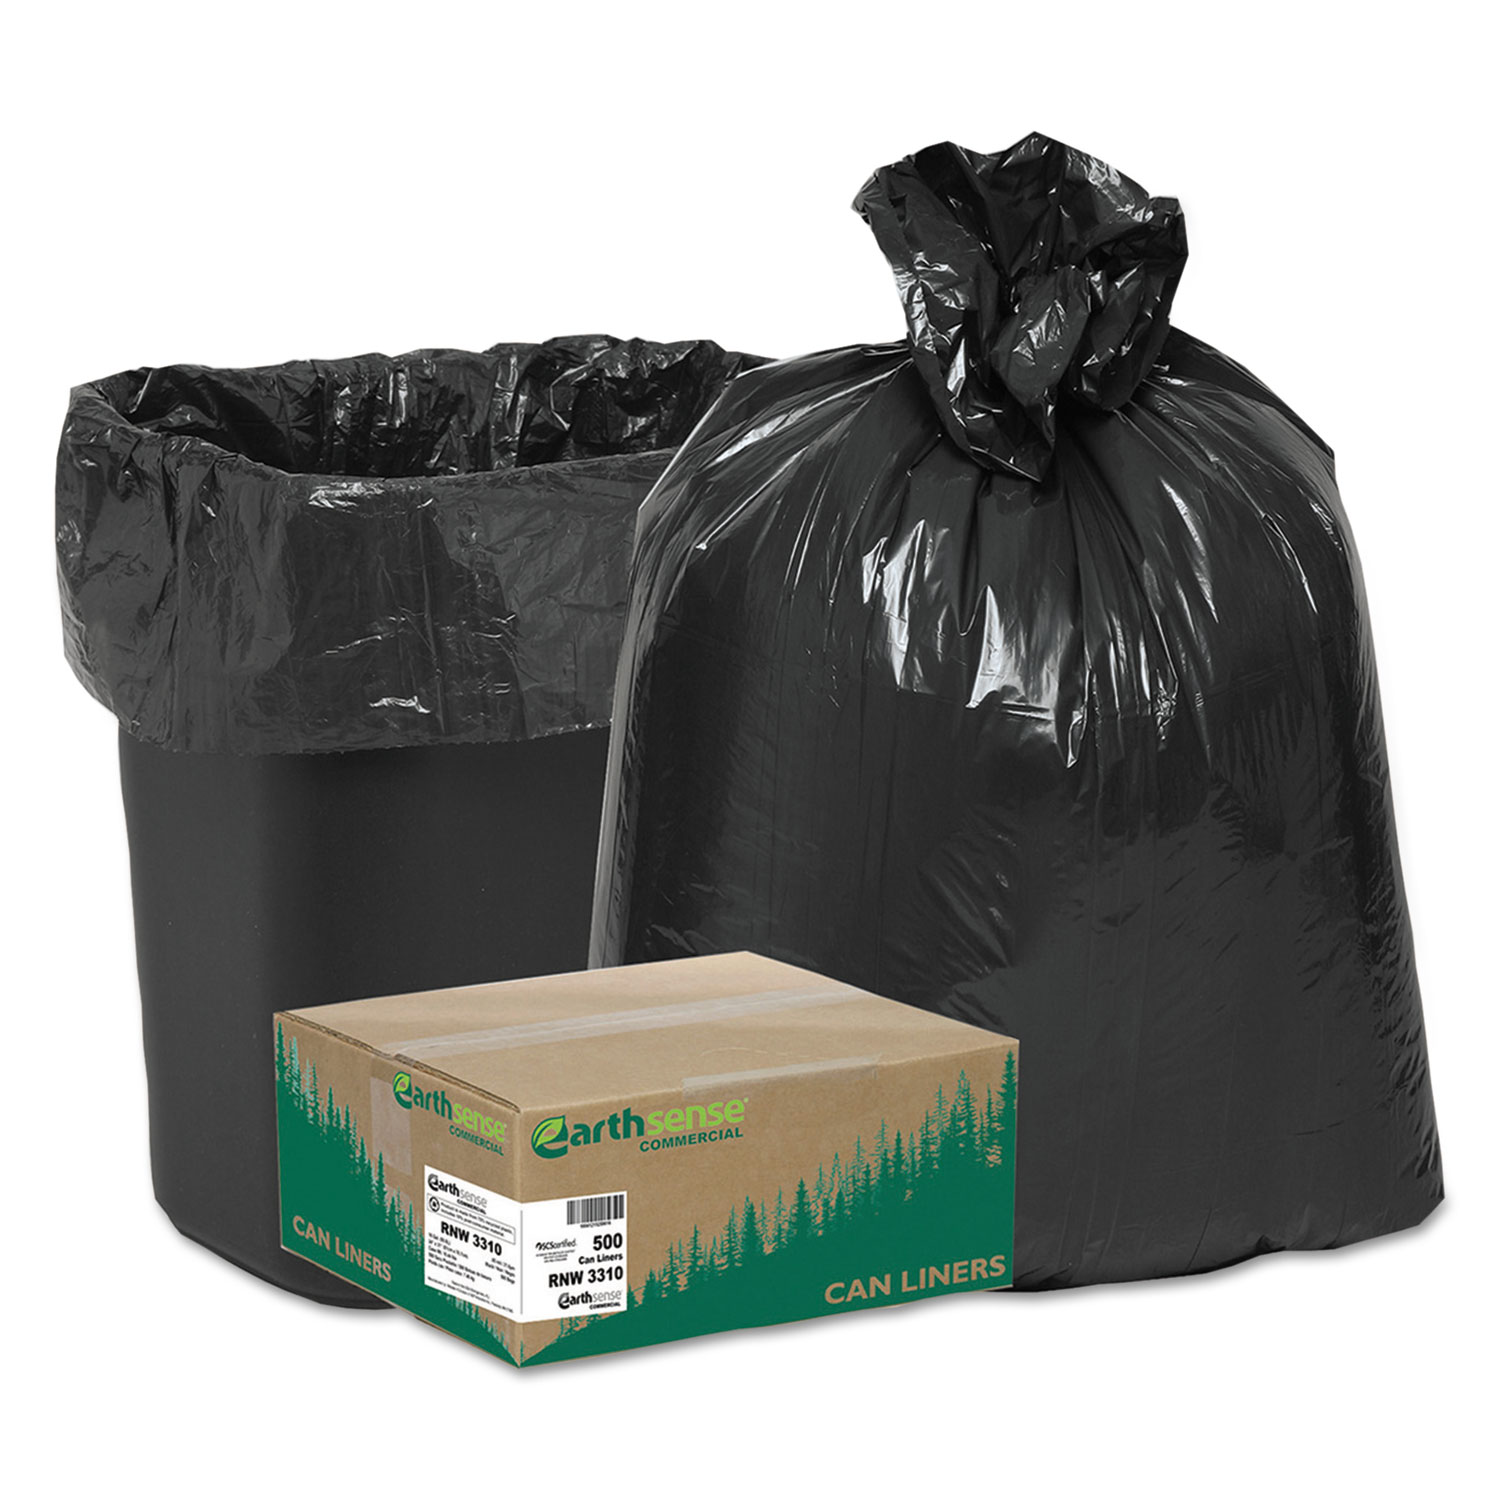  Earthsense Commercial RNW3310 Linear Low Density Recycled Can Liners, 16 gal, 0.85 mil, 24 x 33, Black, 500/Carton (WBIRNW3310) 